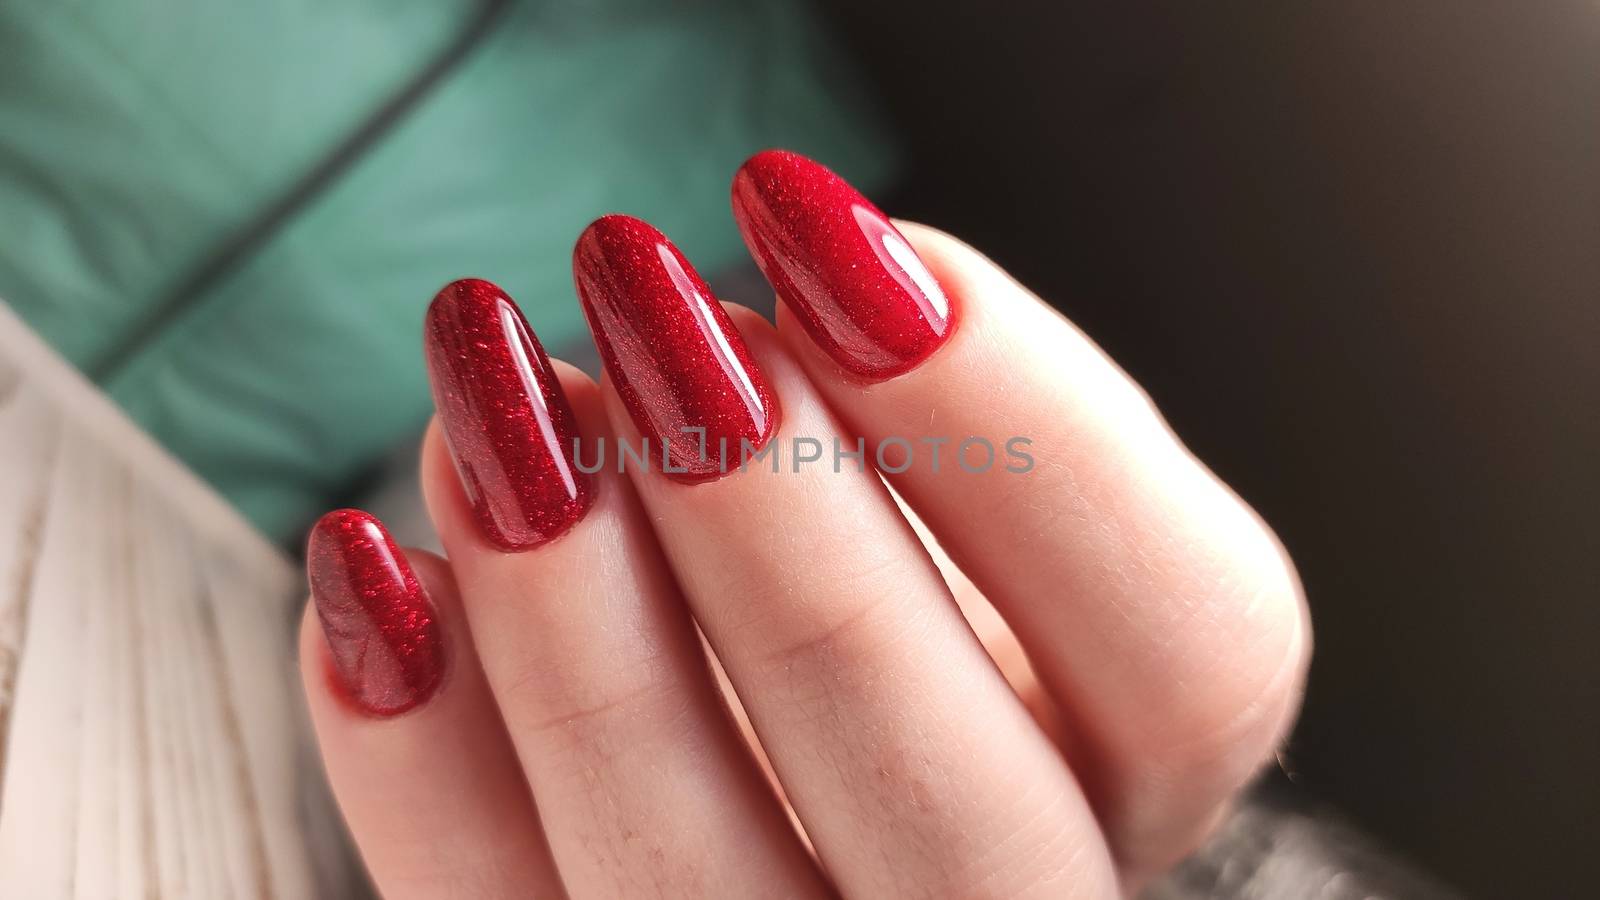 beautiful gel lacquer manicure on a textured trendy background by SmirMaxStock